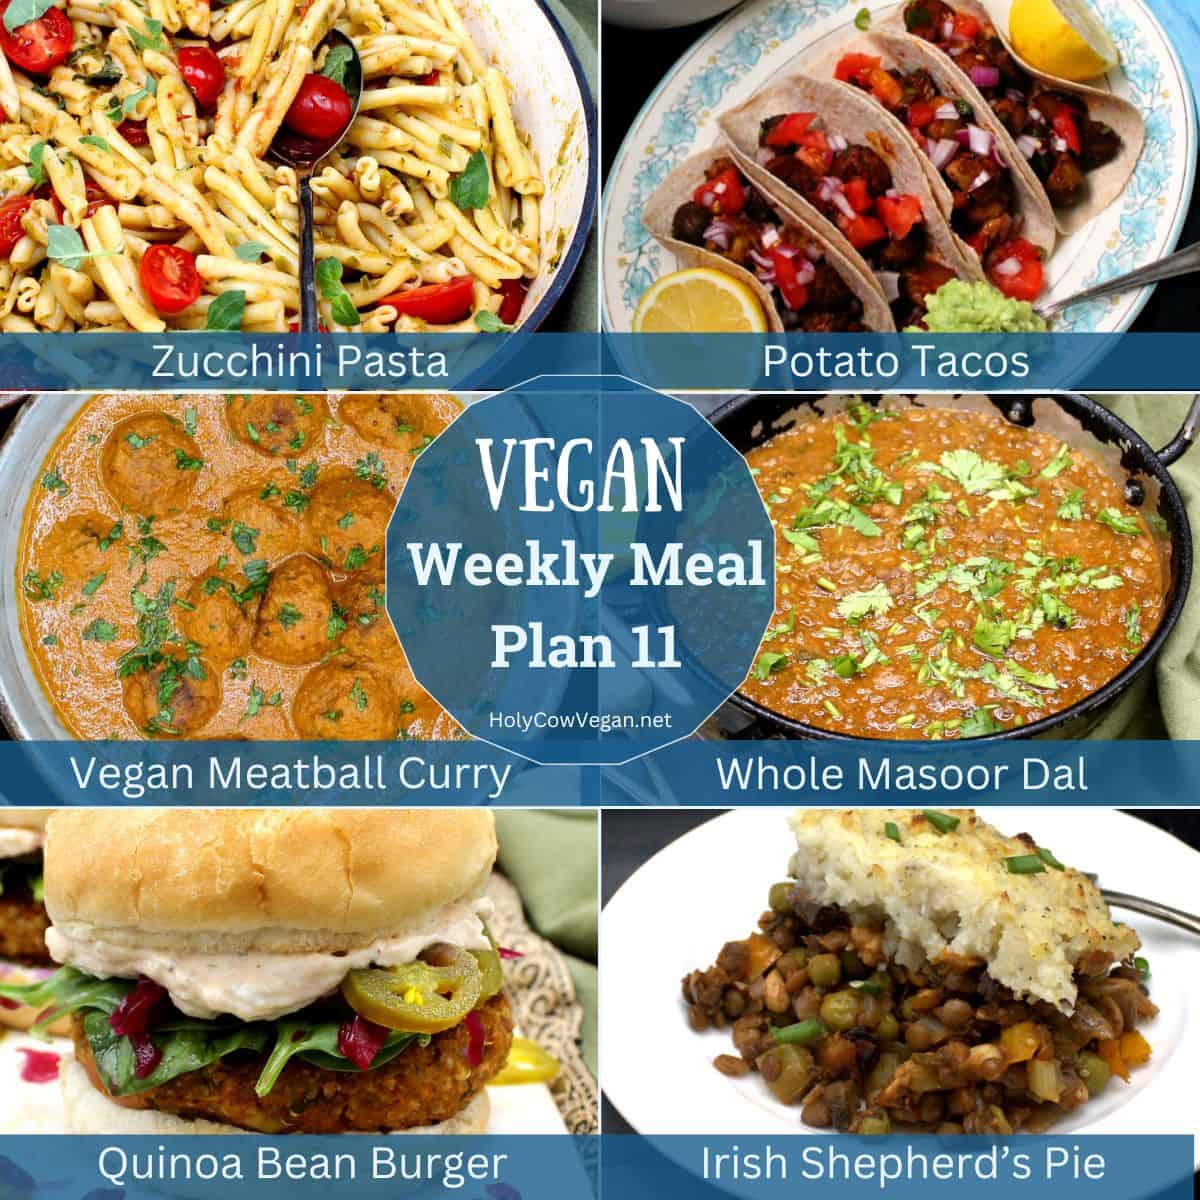 Six vegan dinners with text that says "vegan weekly plan 11".